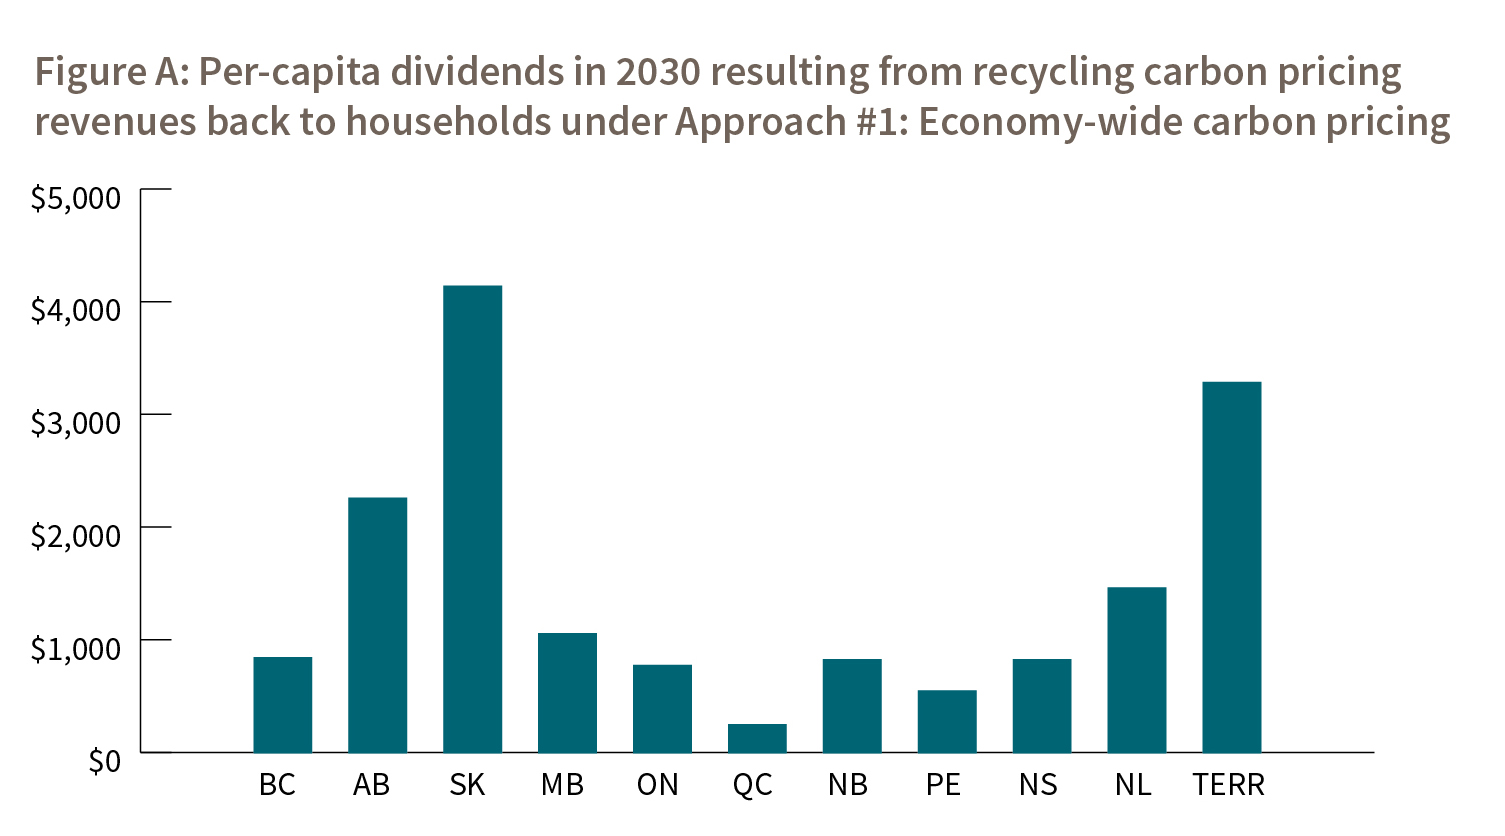 Figure A: Per-capita dividends in 2030 resulting from recycling carbon pricing revenues back to households under Approach #1: Economy-wide carbon pricing